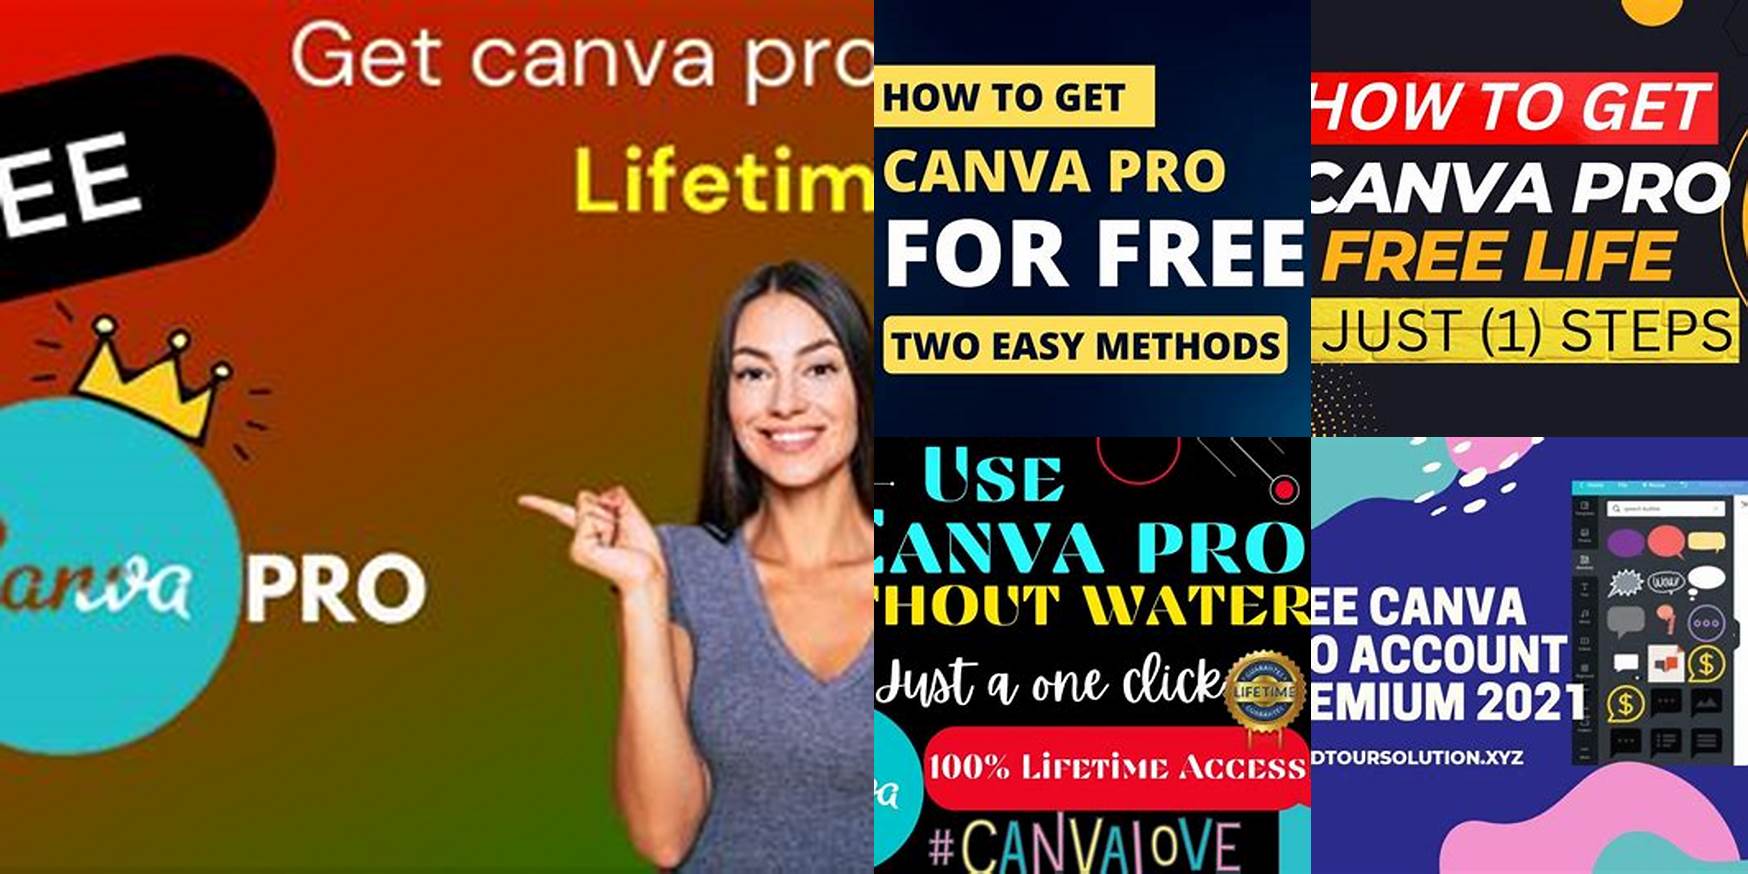 How To Get Canva Pro Free For Lifetime 2021